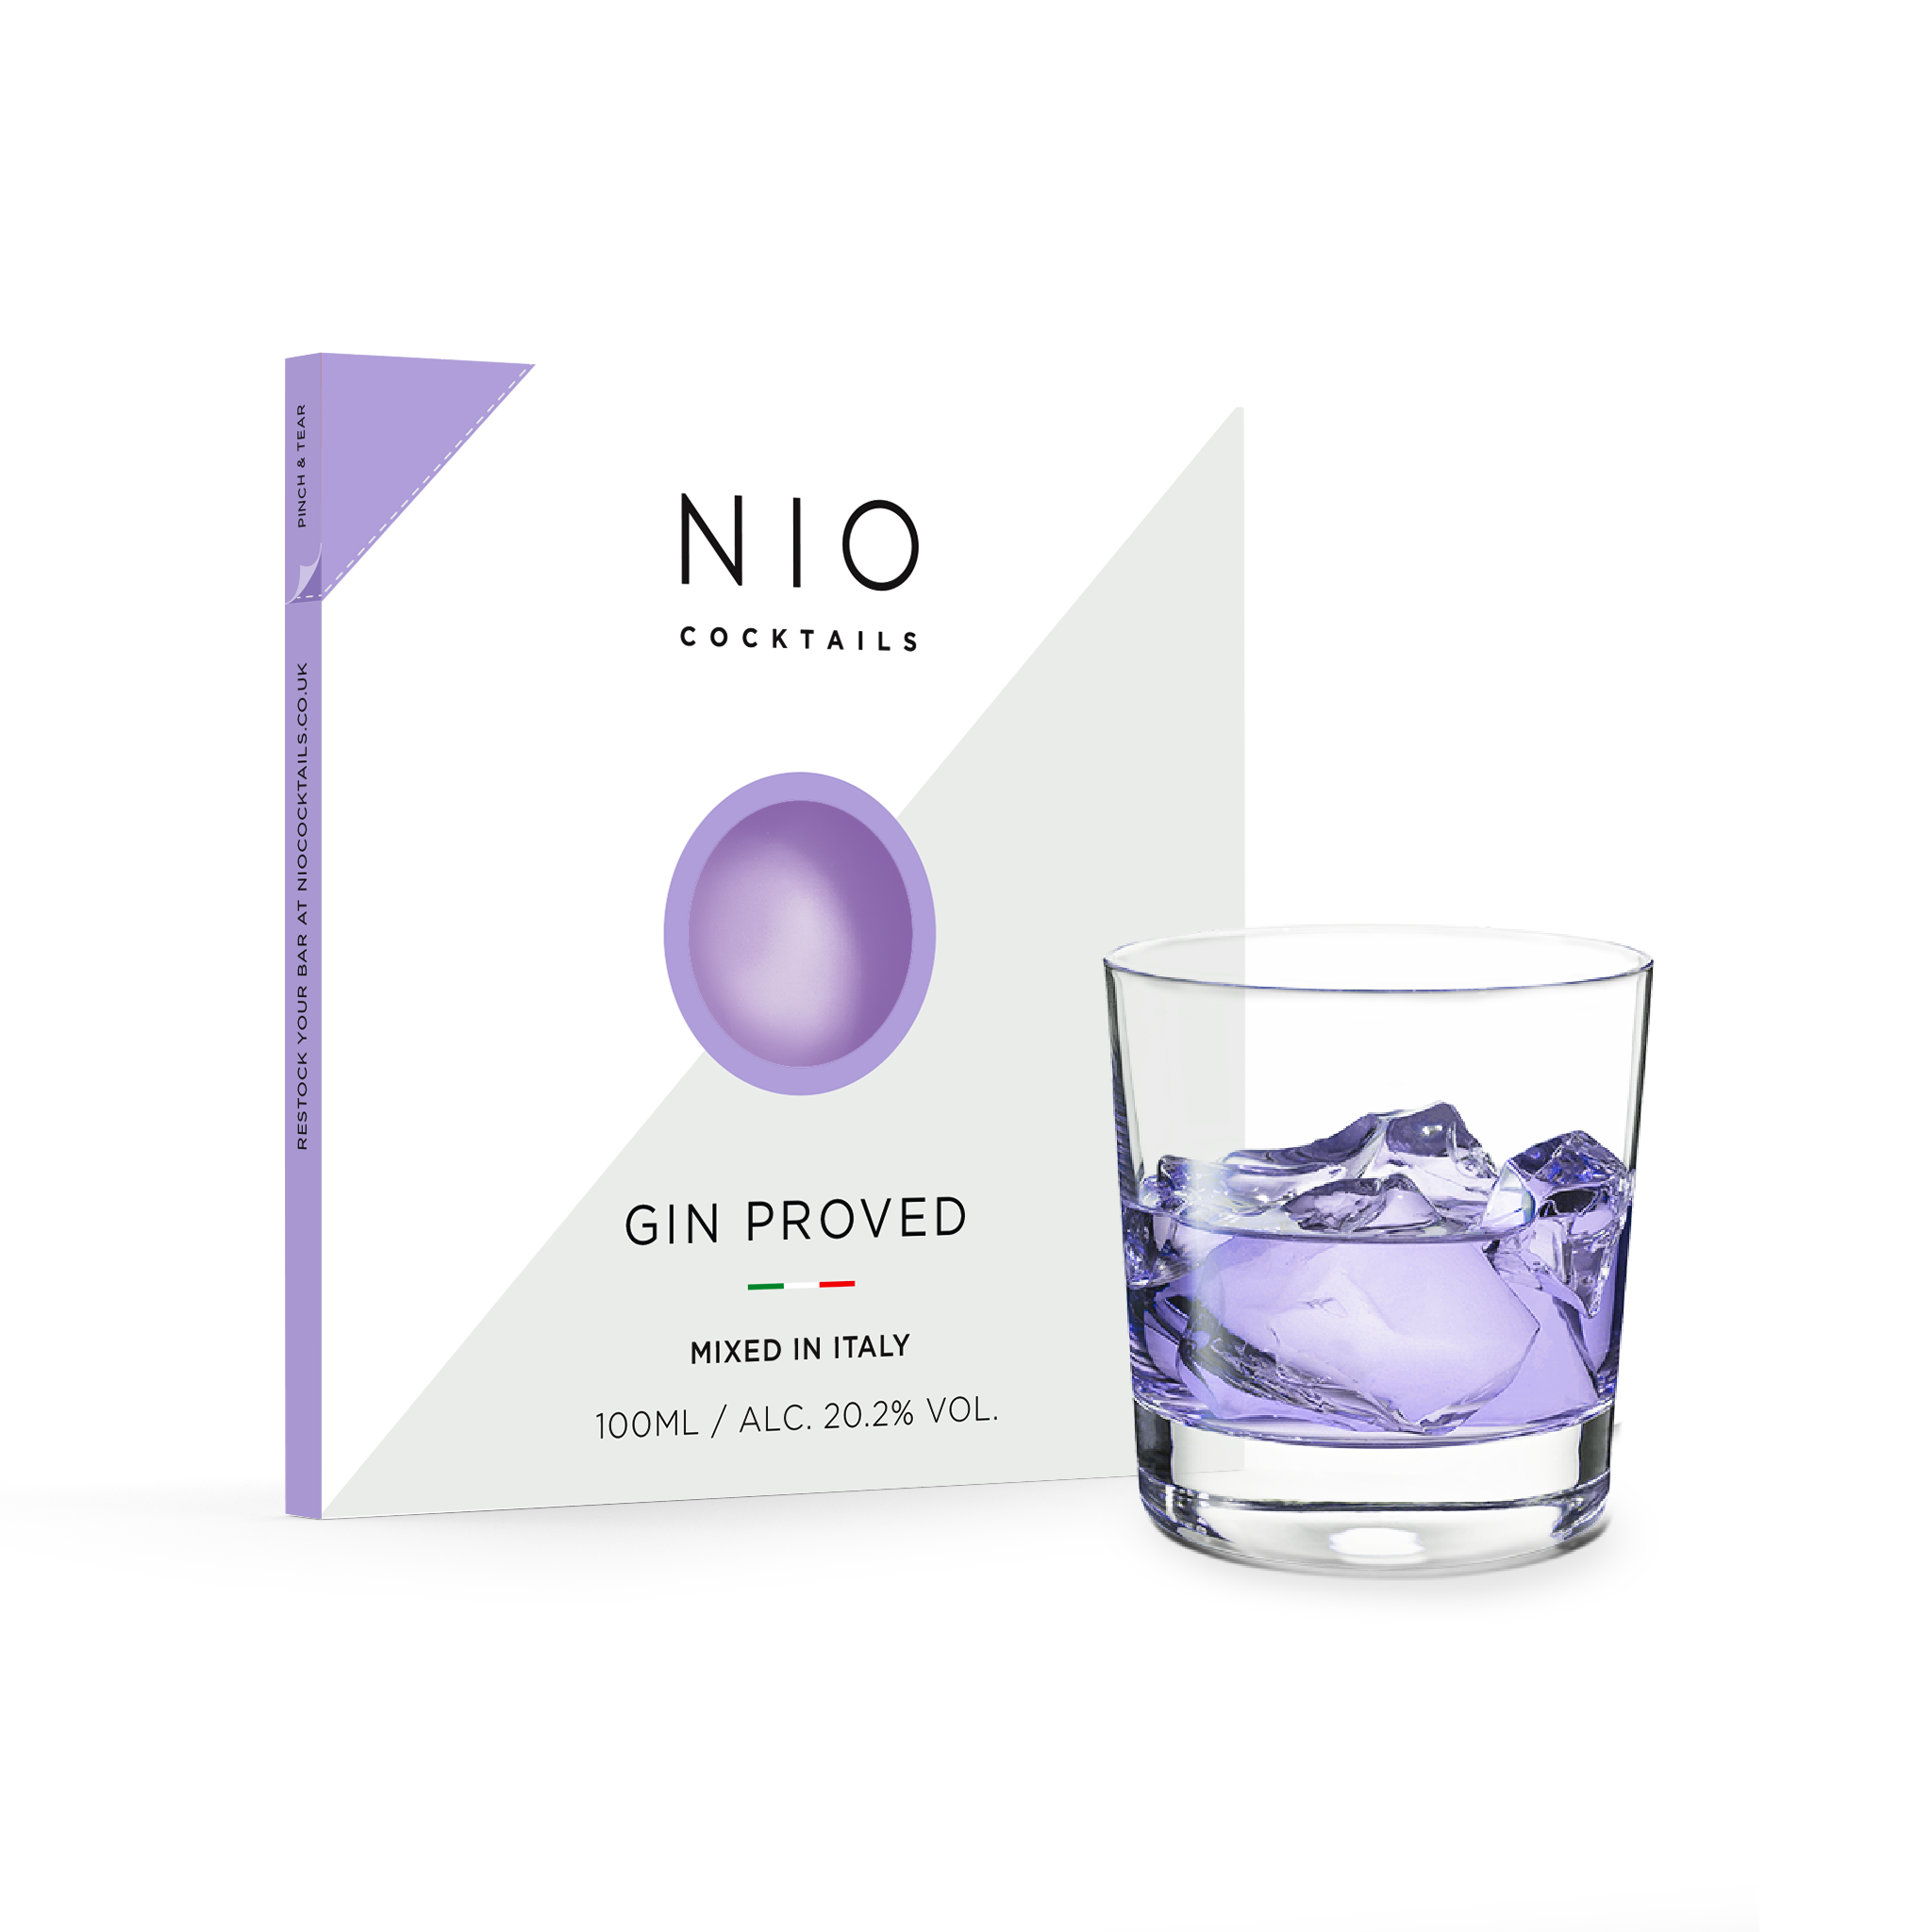 NIO Cocktails Gin Proved 100ml